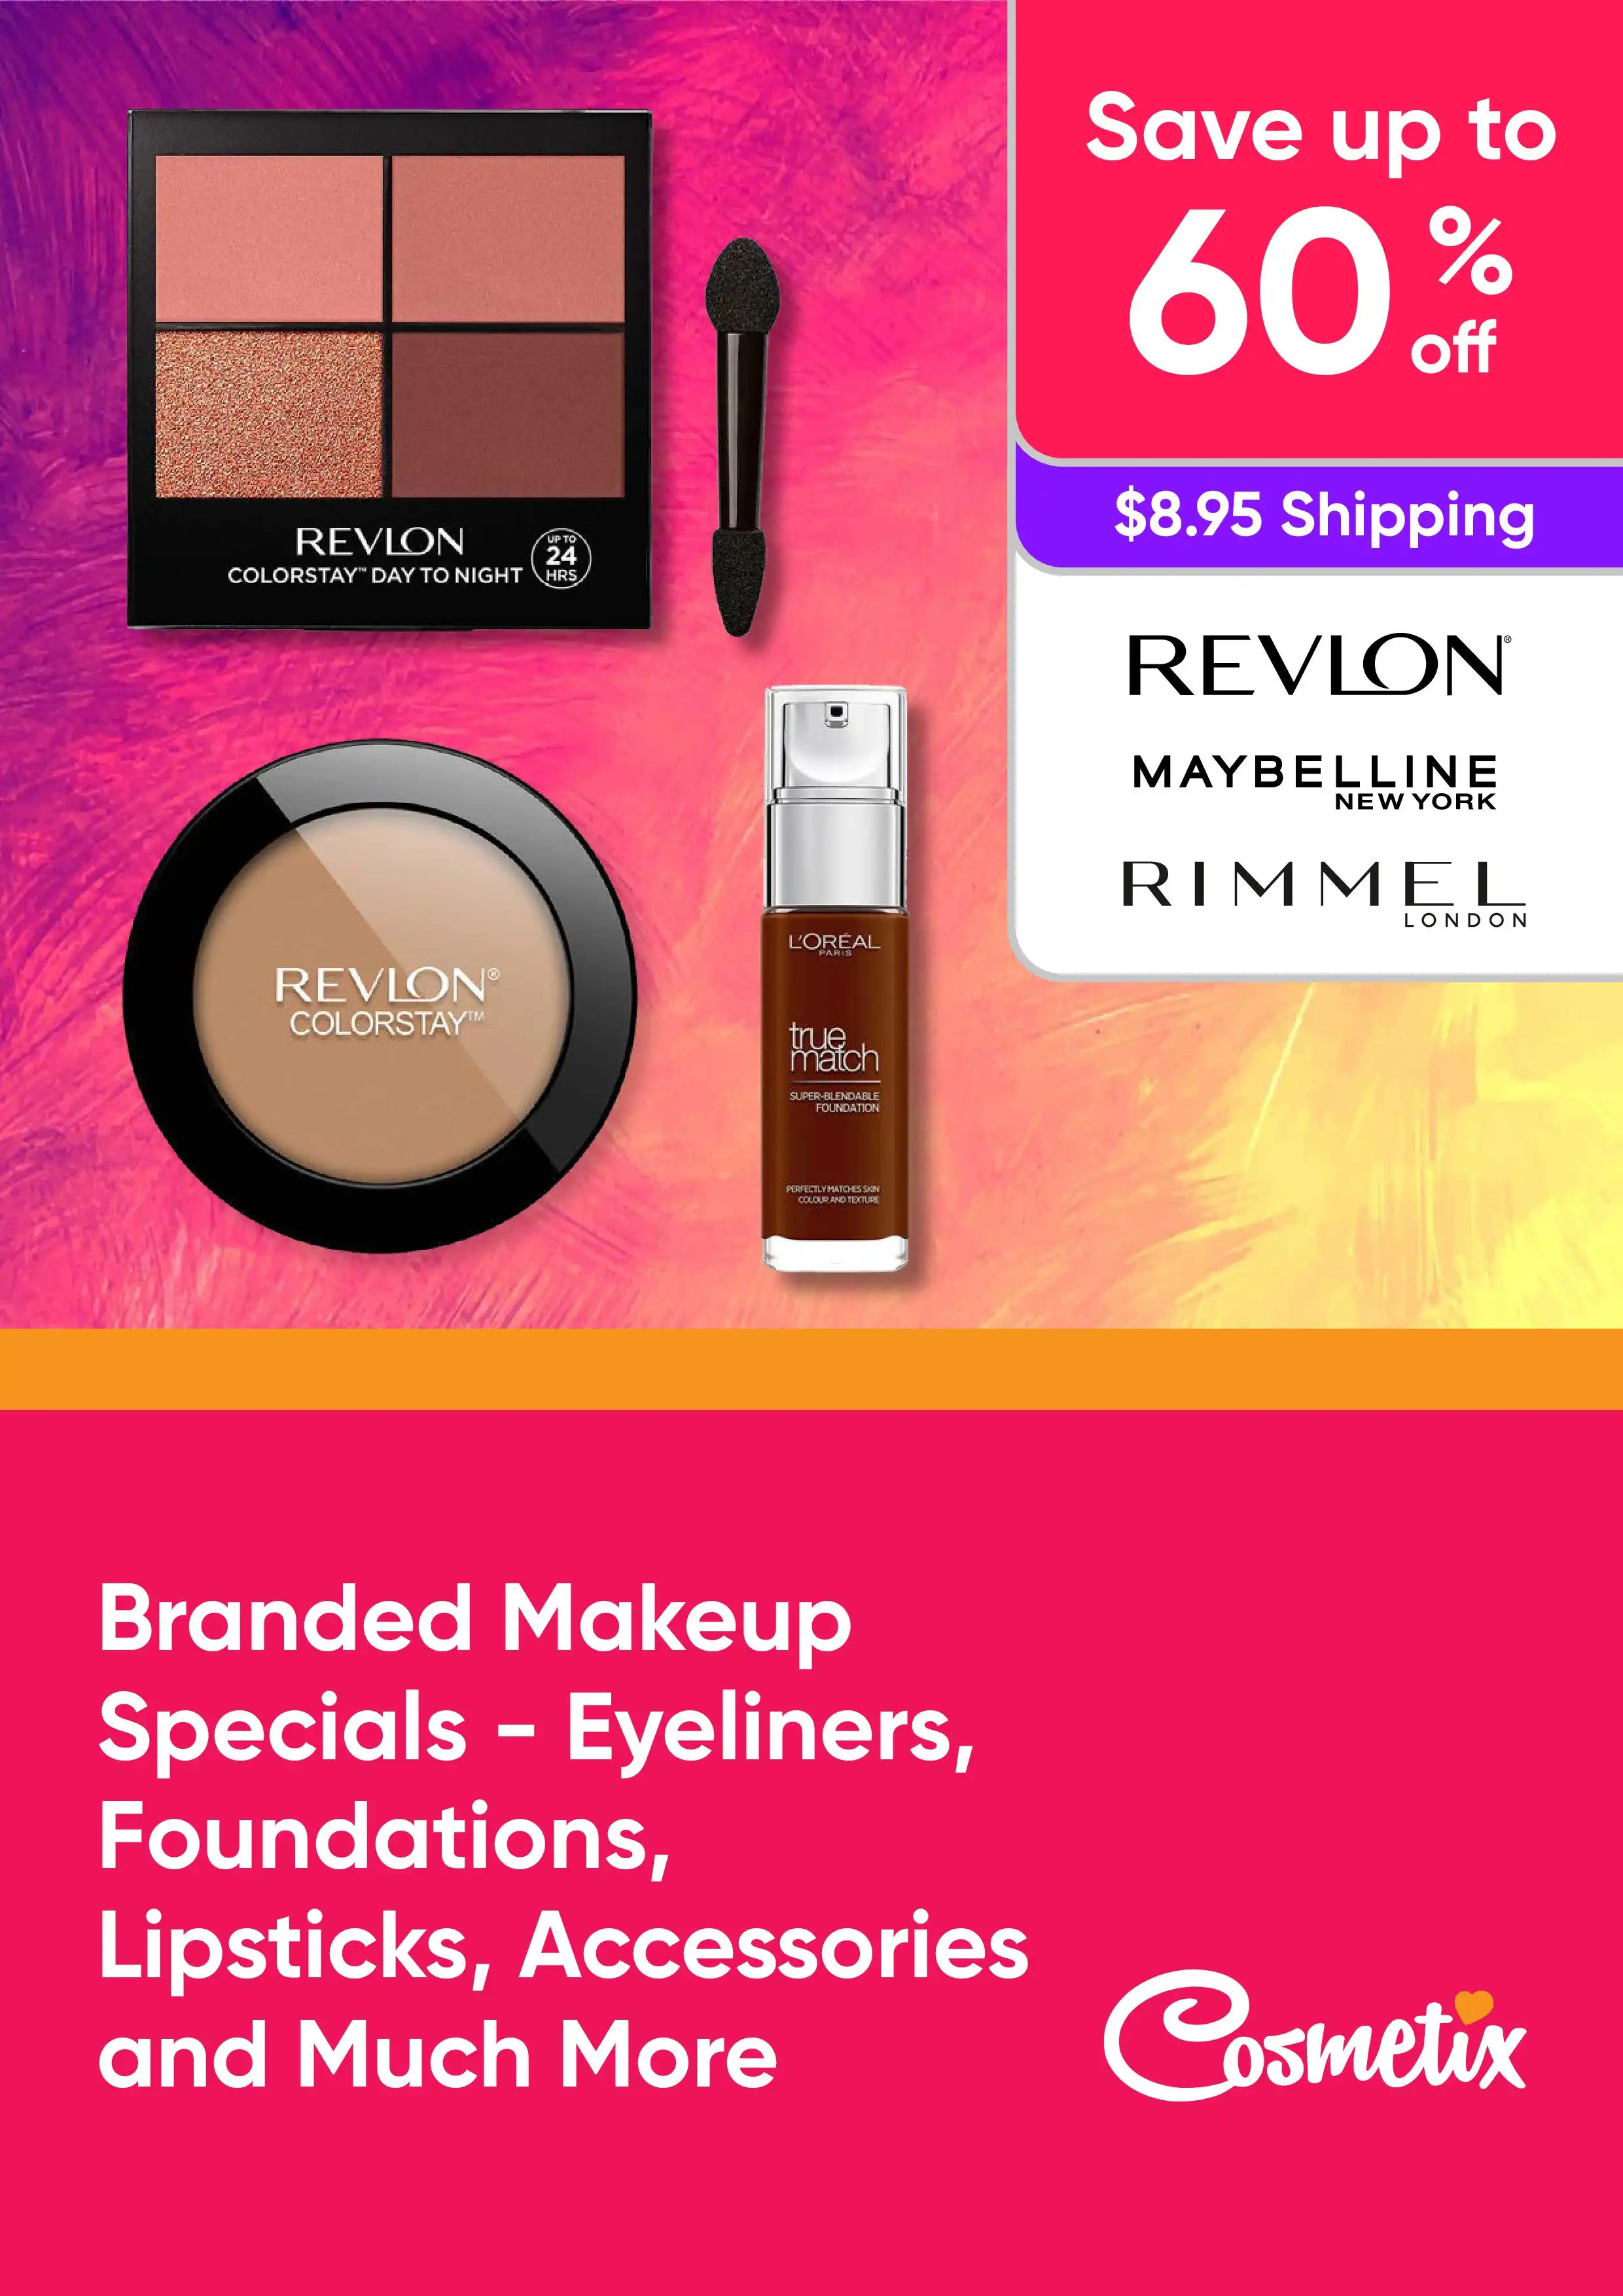 Branded Makeup Specials - Save Up to 60% Off Shop Eyeliners, Foundations, Accessories and Much More